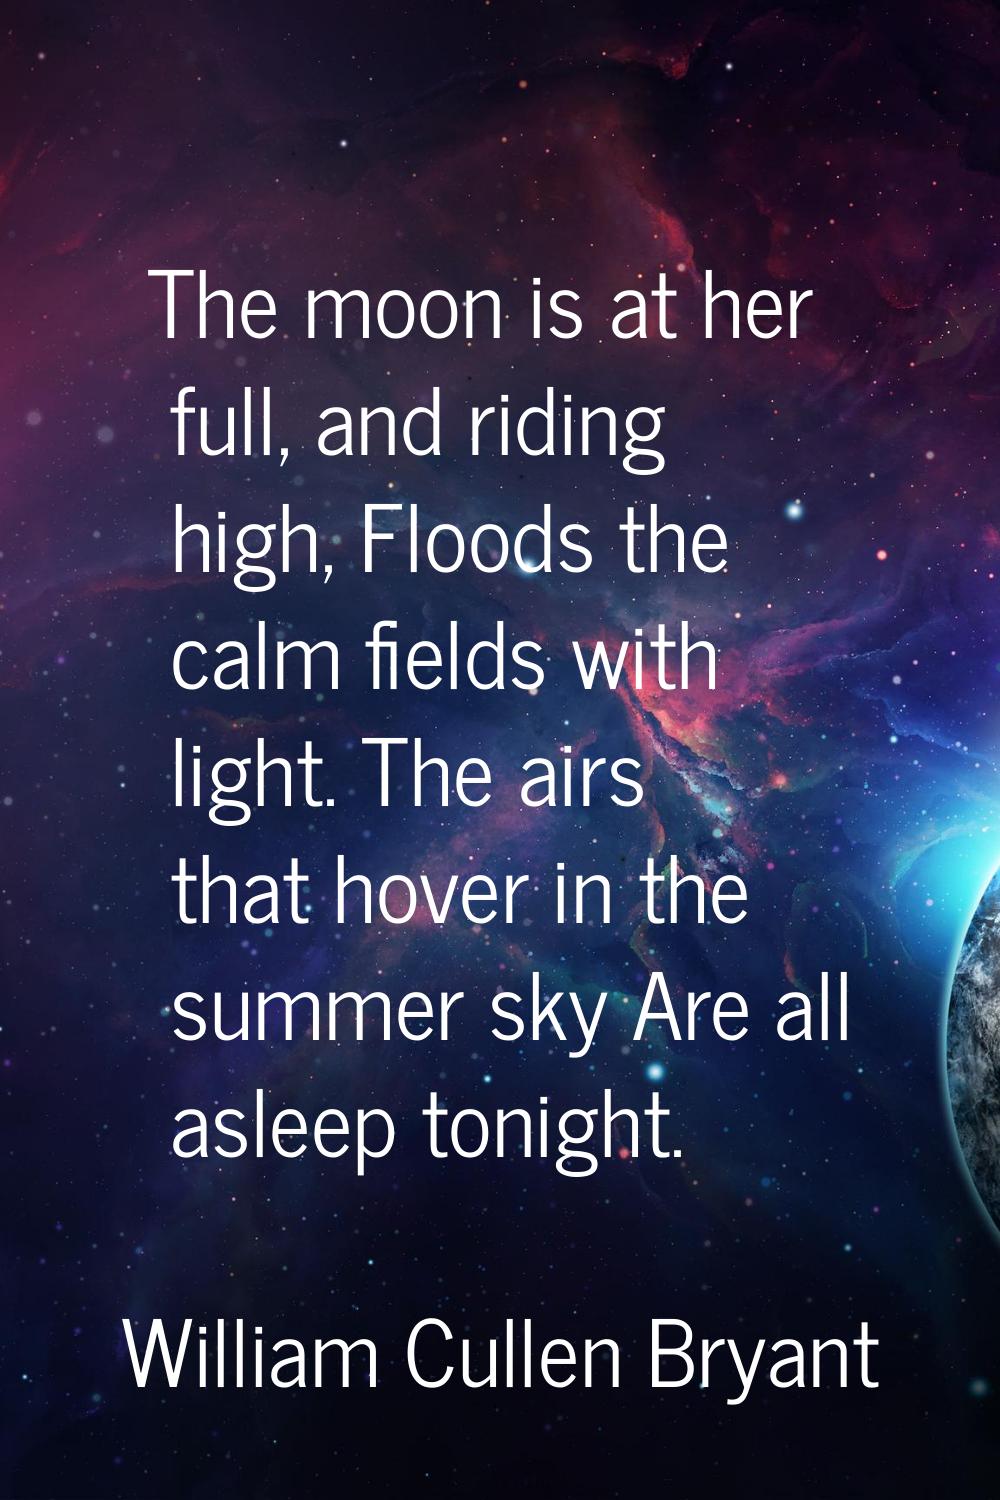 The moon is at her full, and riding high, Floods the calm fields with light. The airs that hover in